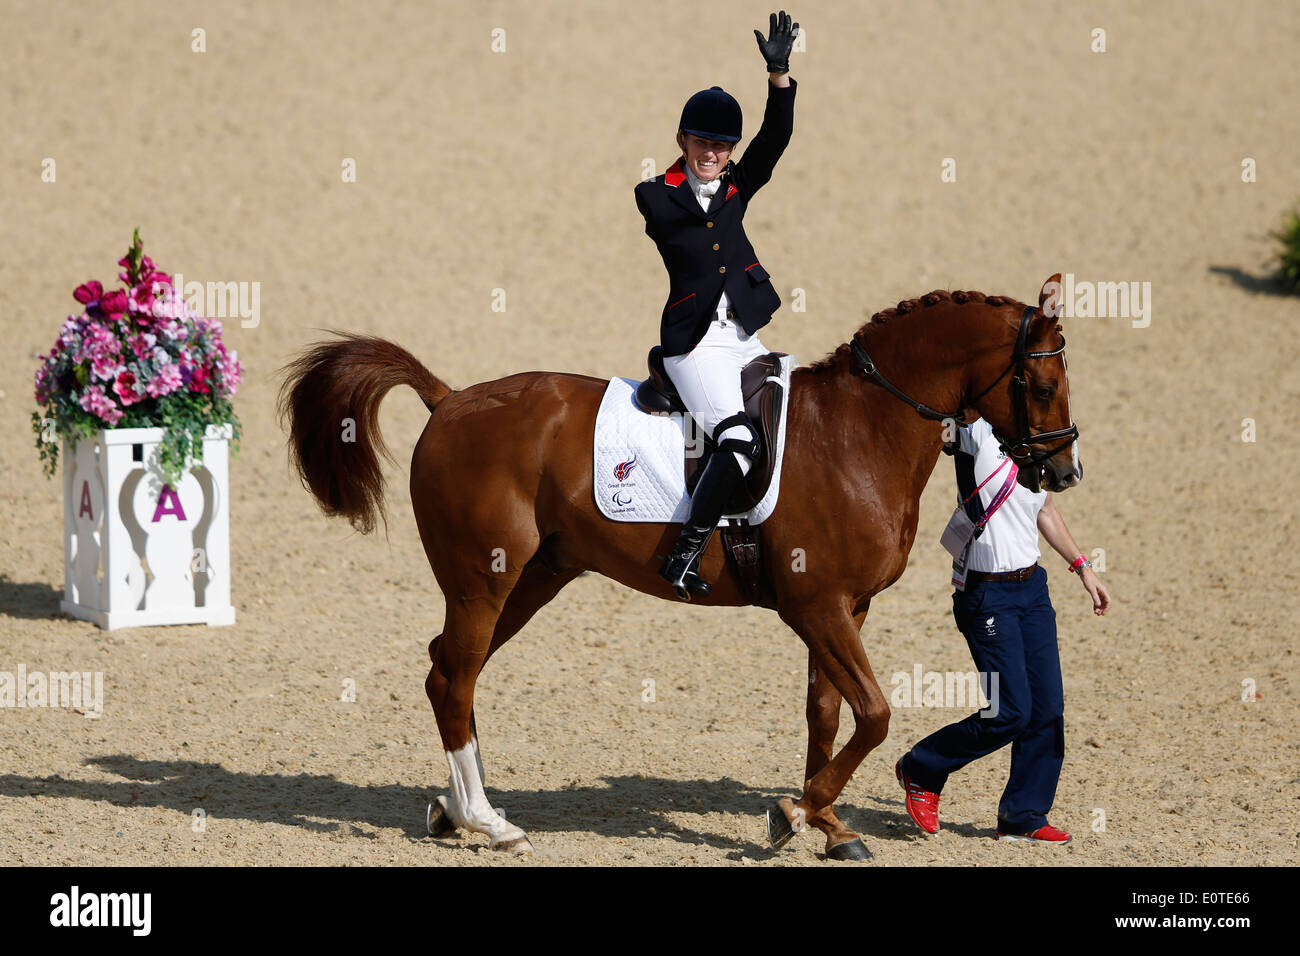 Deborah Criddle of Britain riding LJT Akilles waves to fans after competing in the Equestrian Dressage Individual Freestyle Test Grade IV event at Greenwich Park during the London 2012 Paralympic Games in London, Britain, 04 September 2012. Criddle won the silver medal. Stock Photo